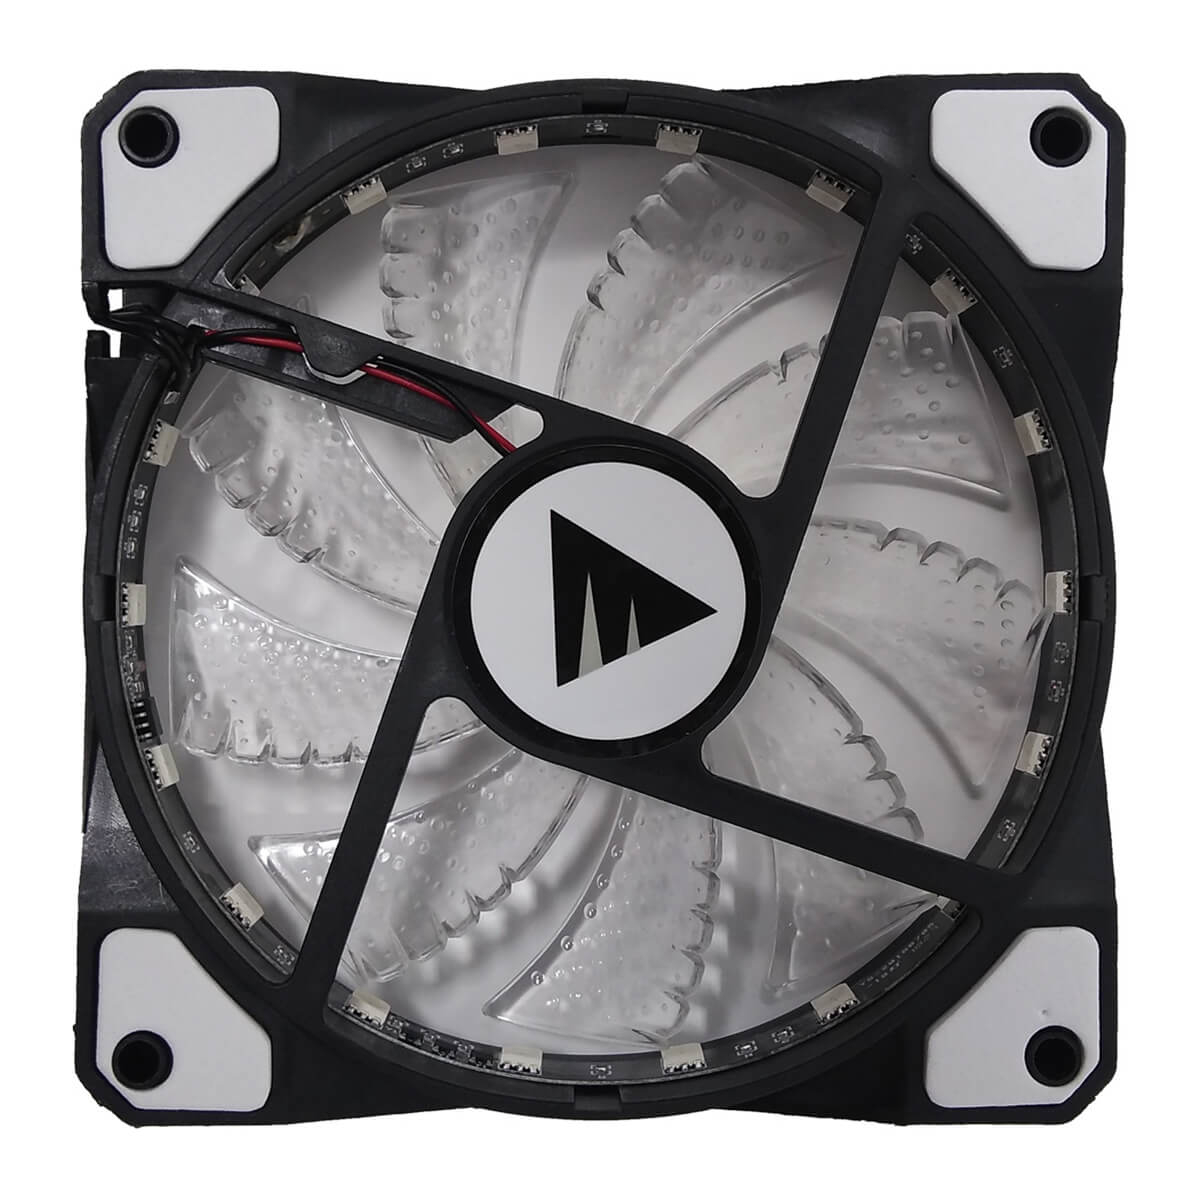 FAN BF-06 LED 7 CORES 120MM - 2